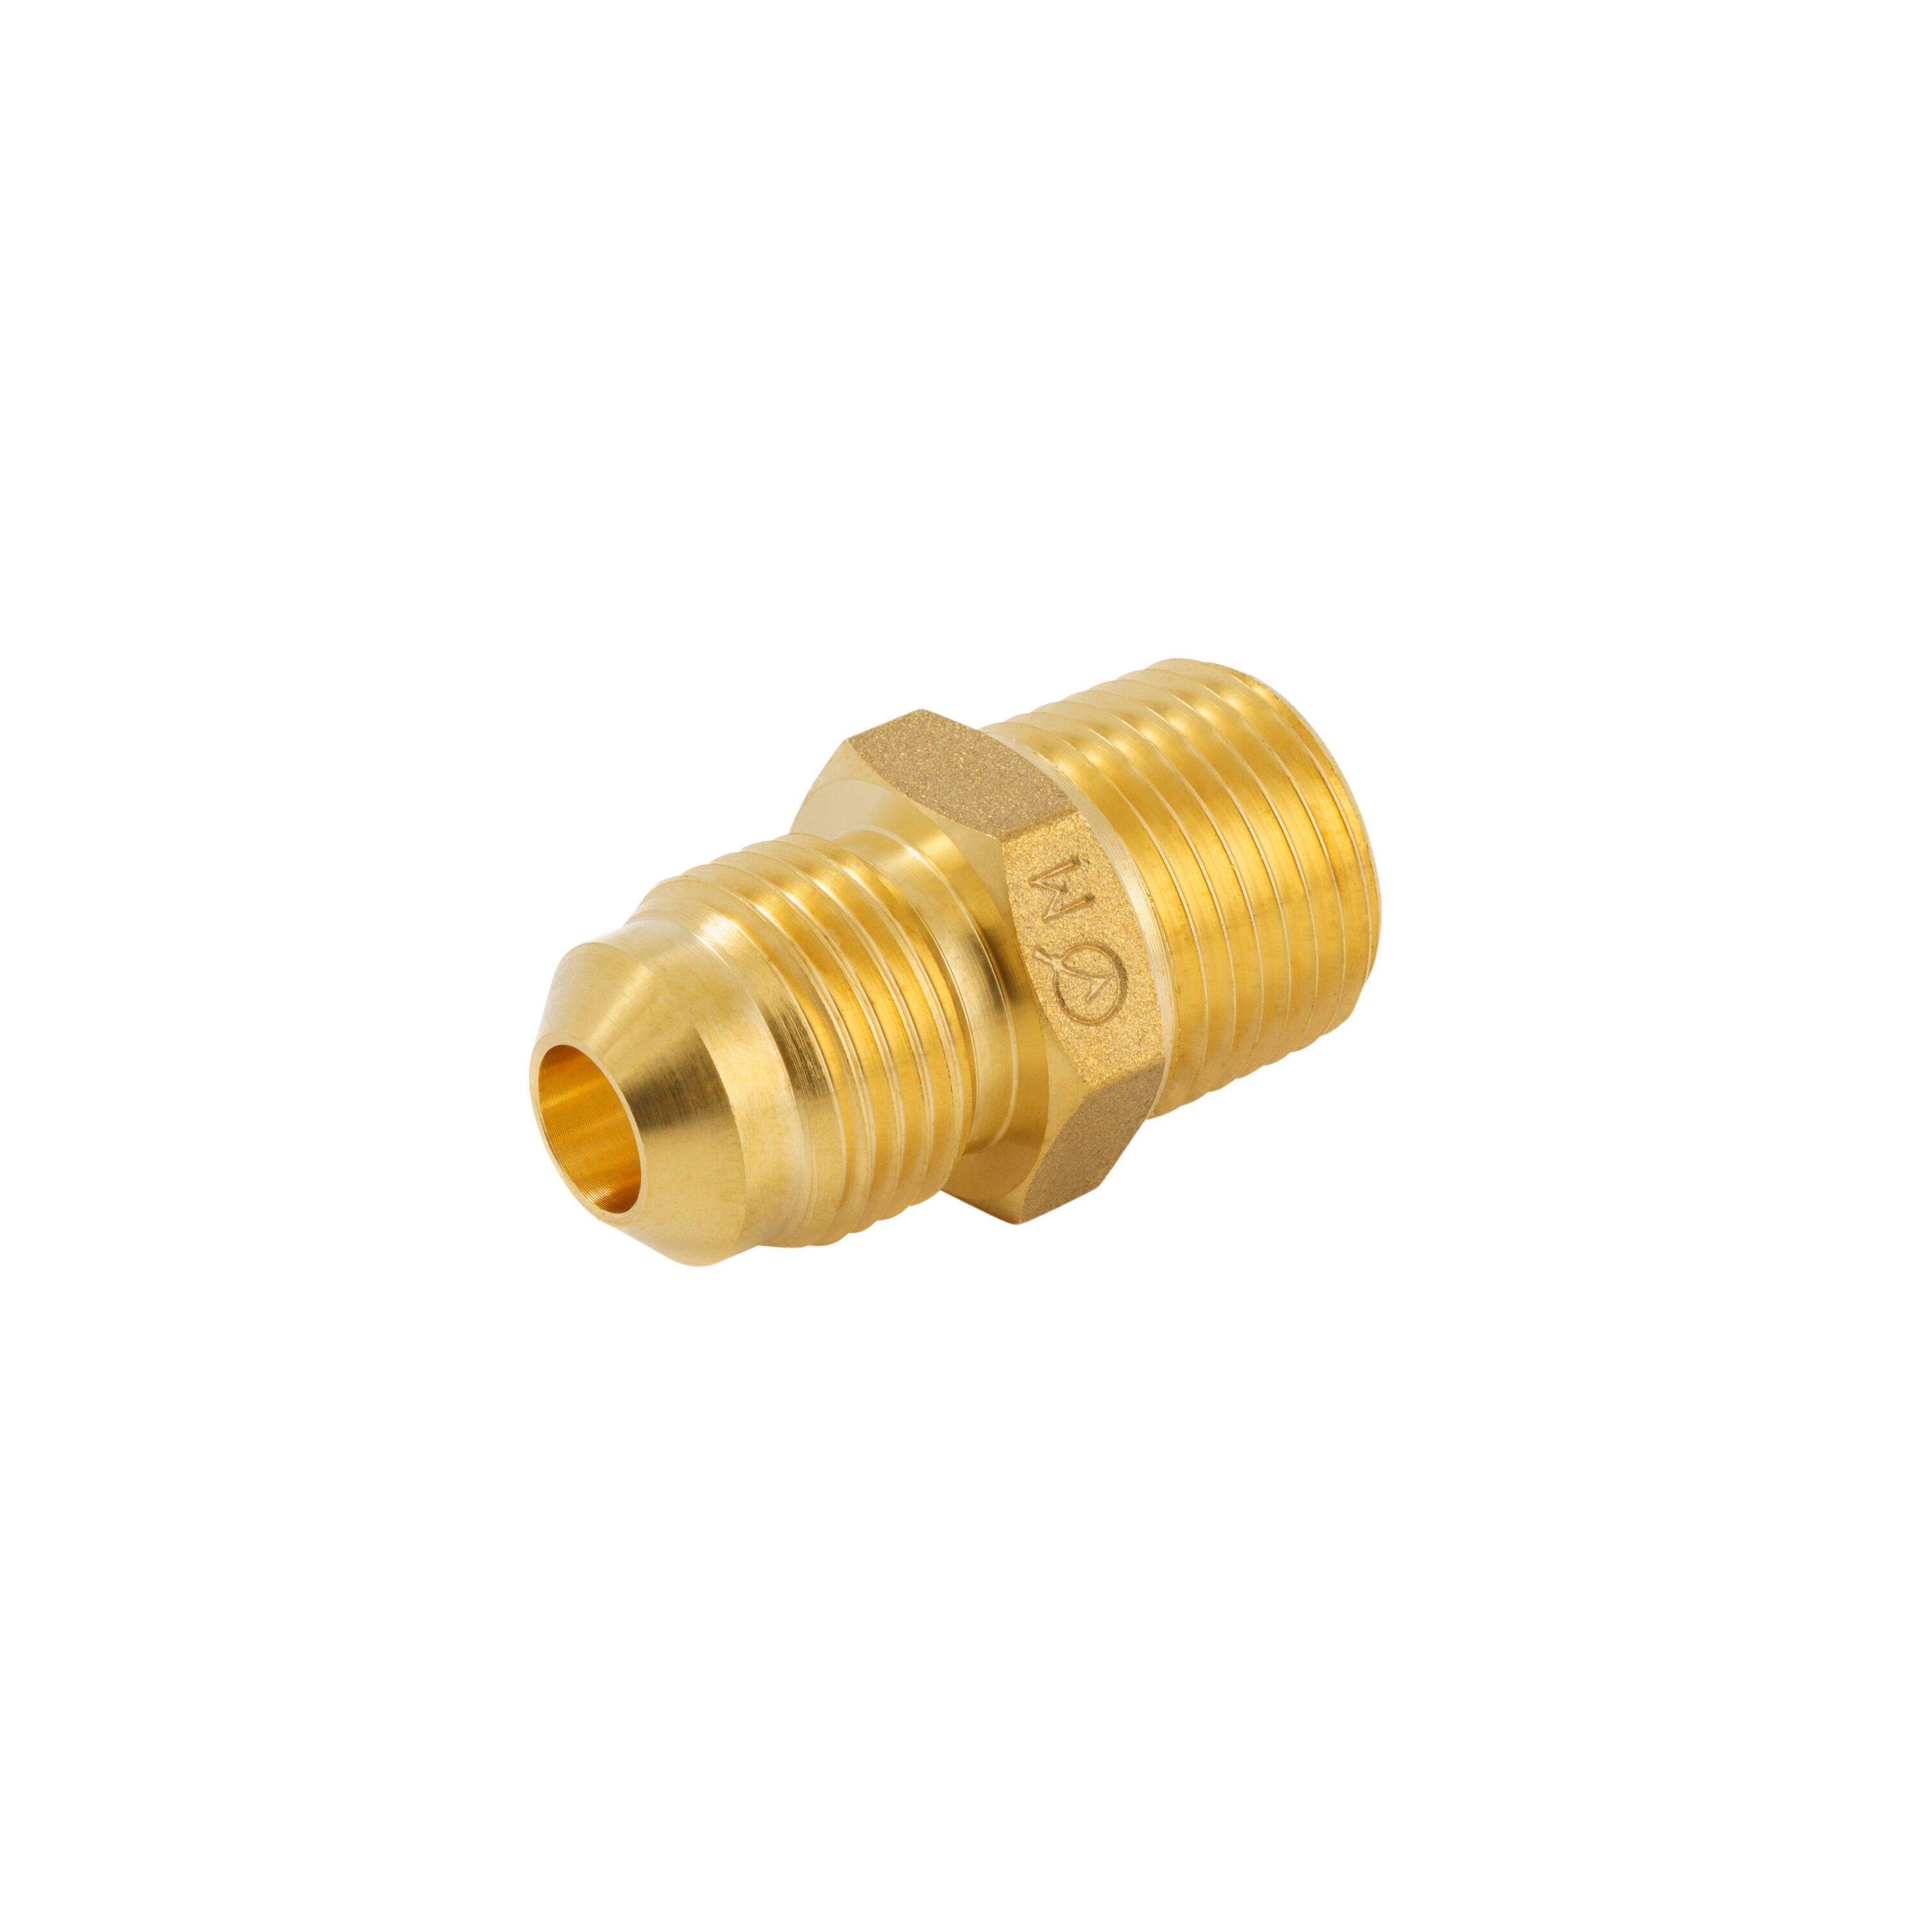 Proline Series 3/8-in x 3/8-in Threaded Union Fitting in the Brass